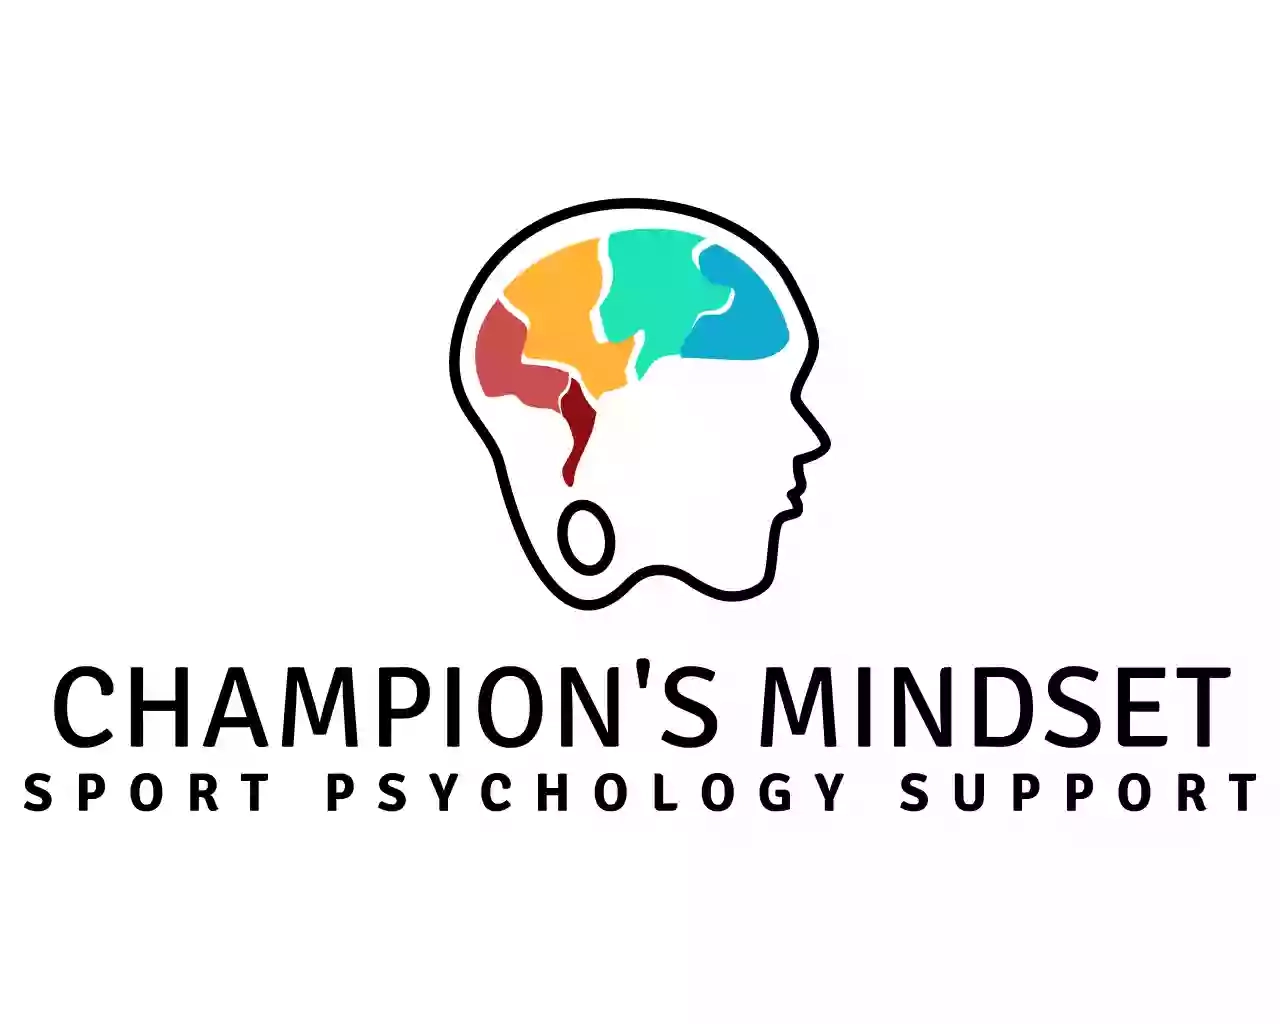 Champion’s Mindset. Sport Psychology Consultant in Stockport